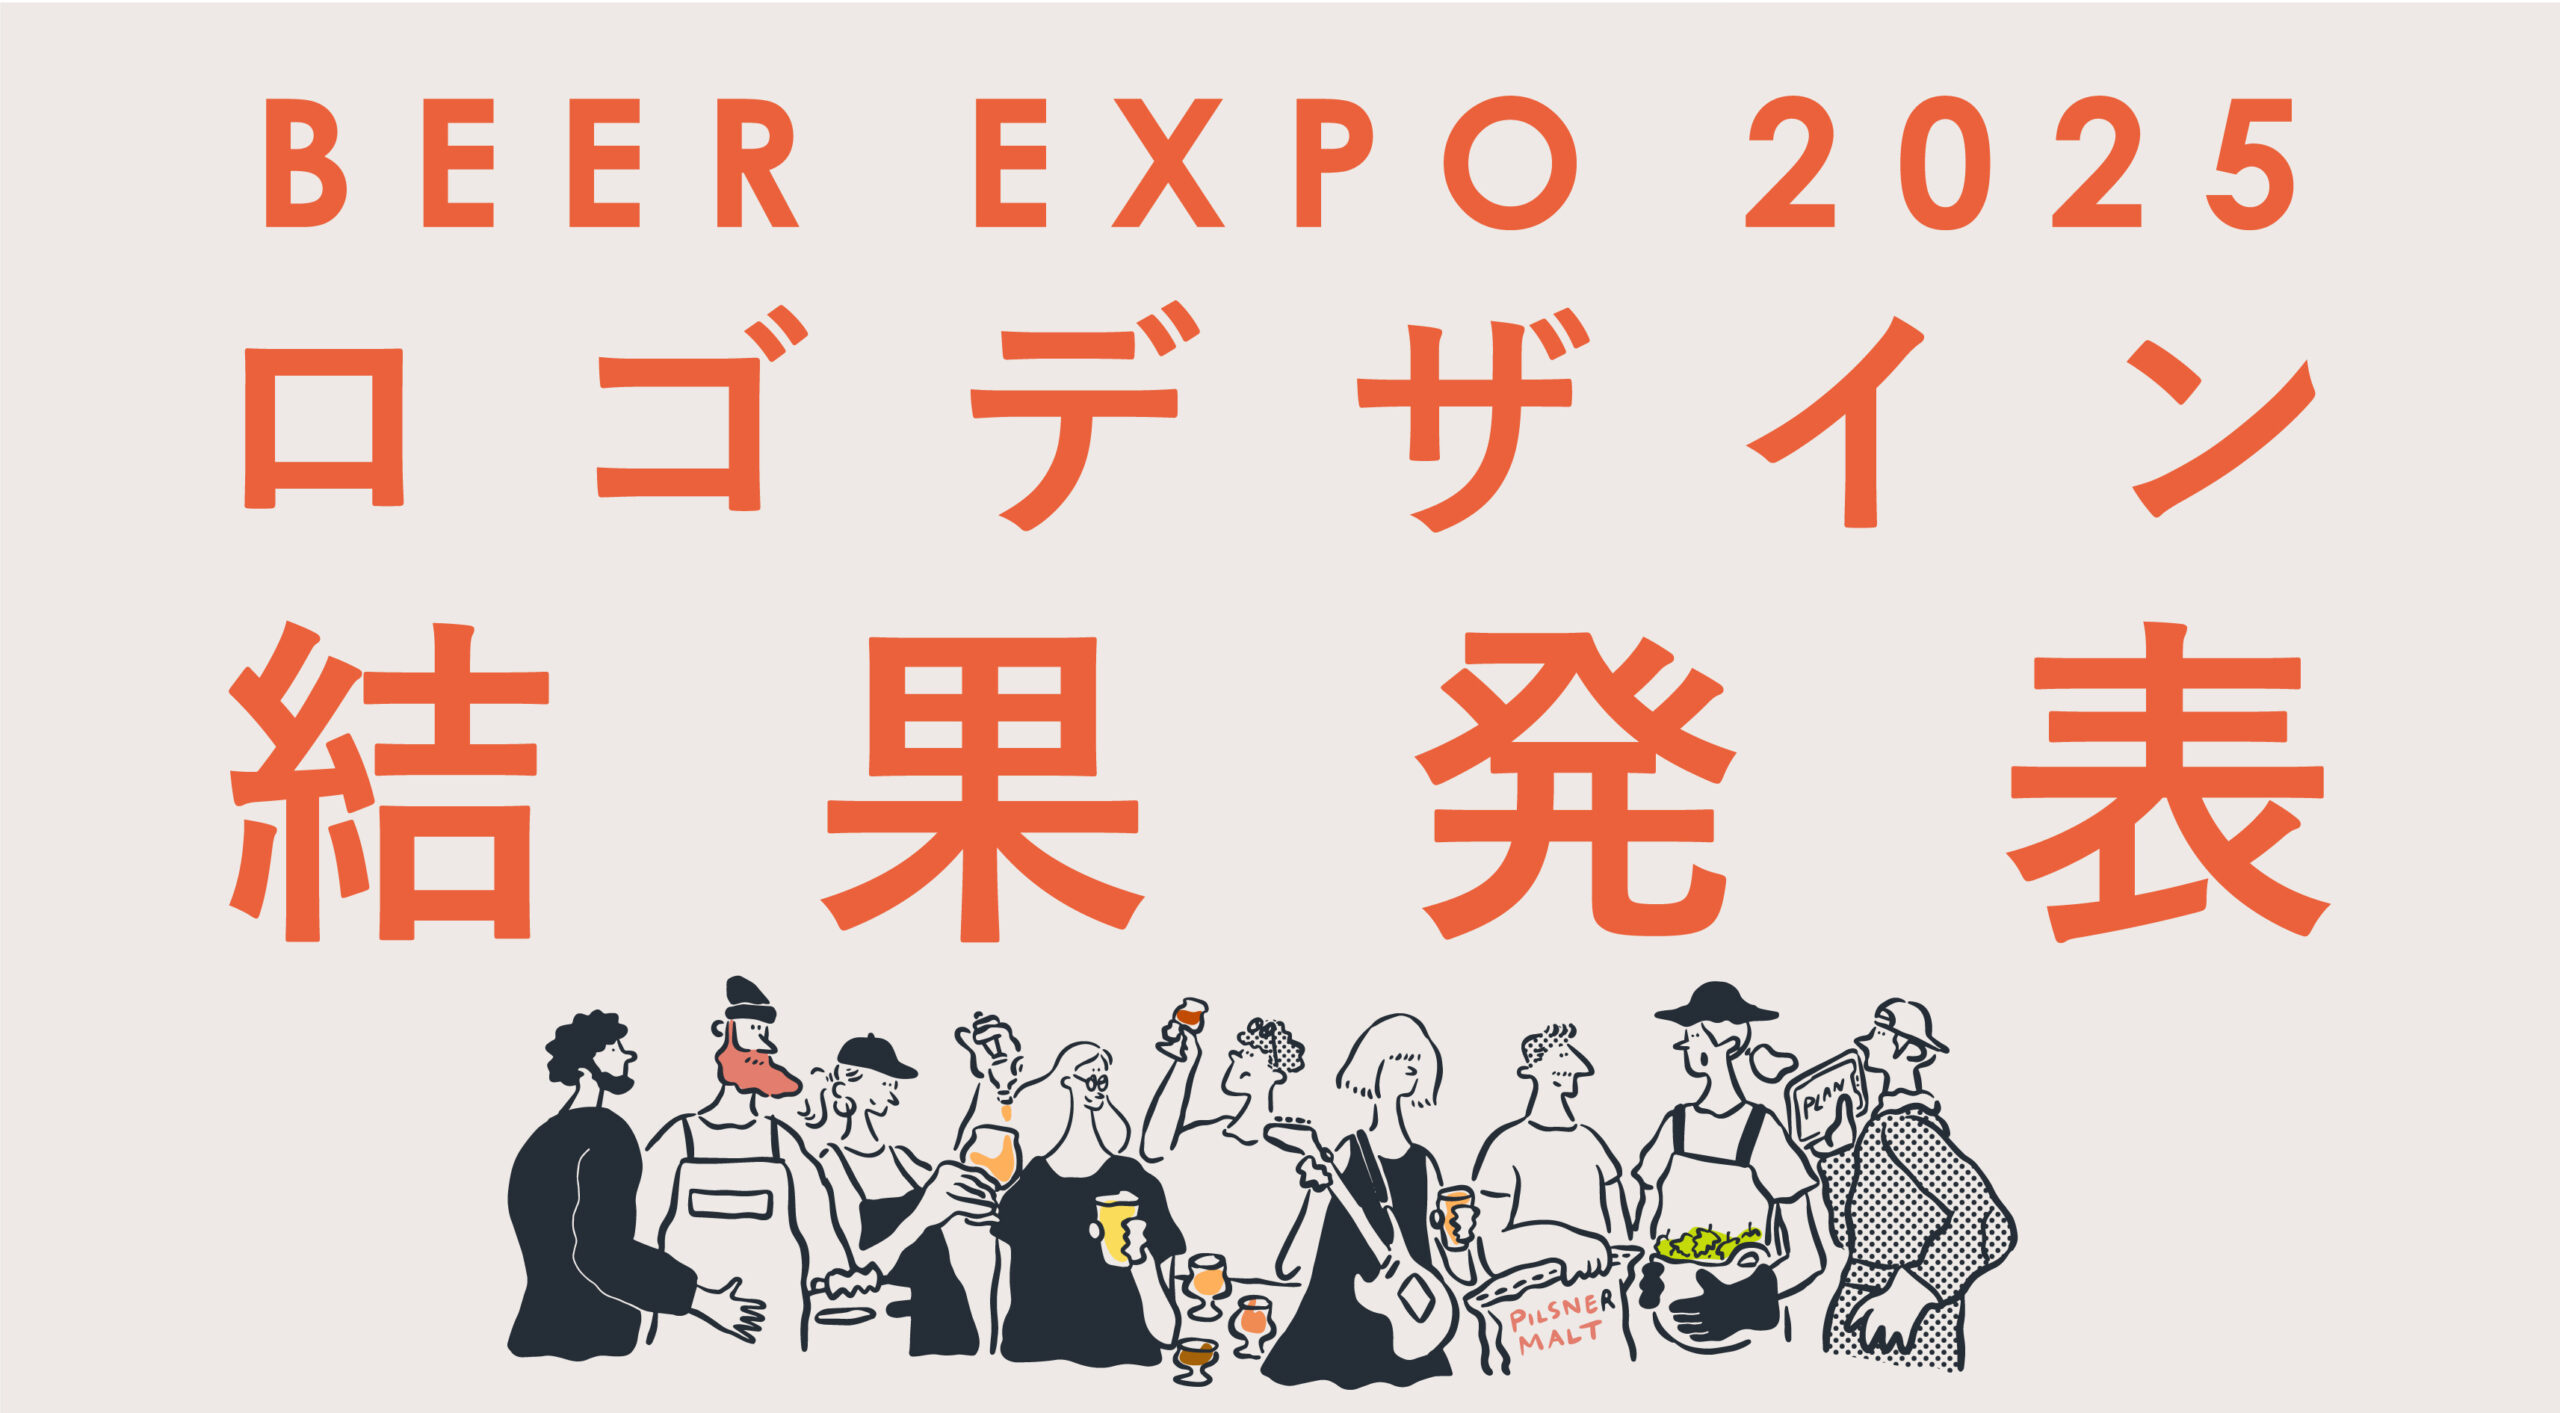 BEER EXPO 2025 ロゴマーク決定！